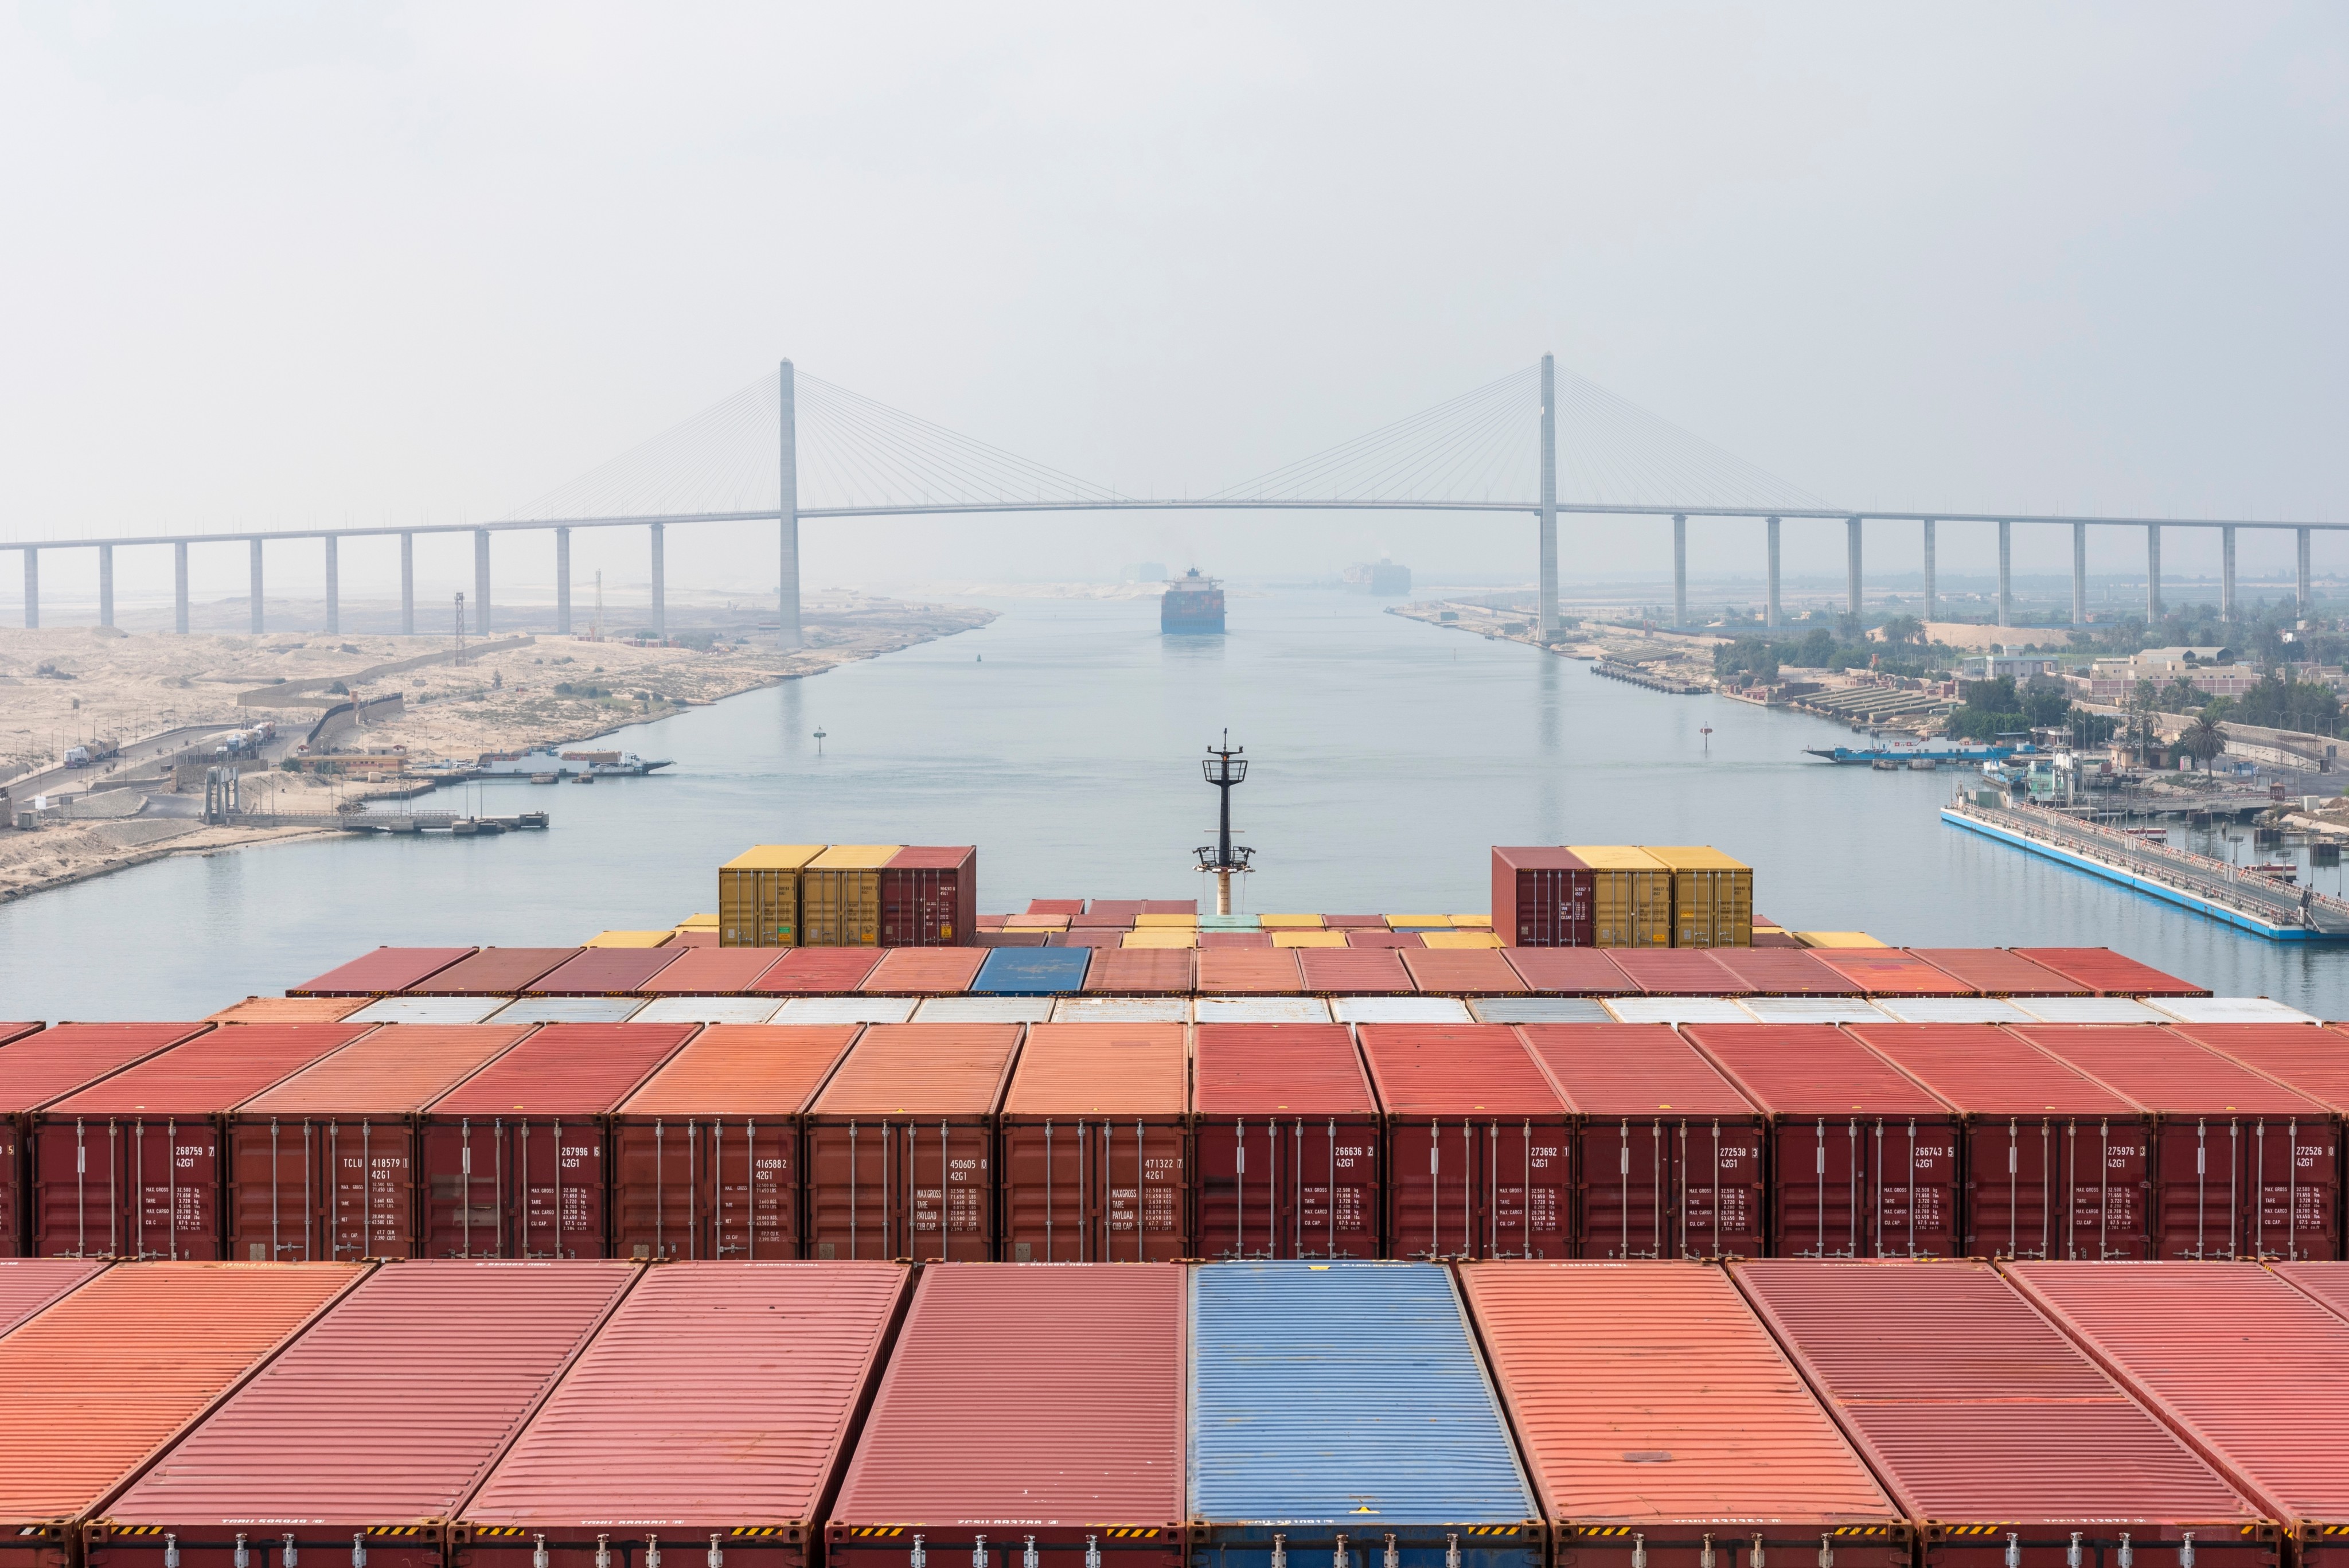 The Suez Canal Economic Zone has attracted hundreds of companies, most of them Chinese. Photo: Shutterstock Images